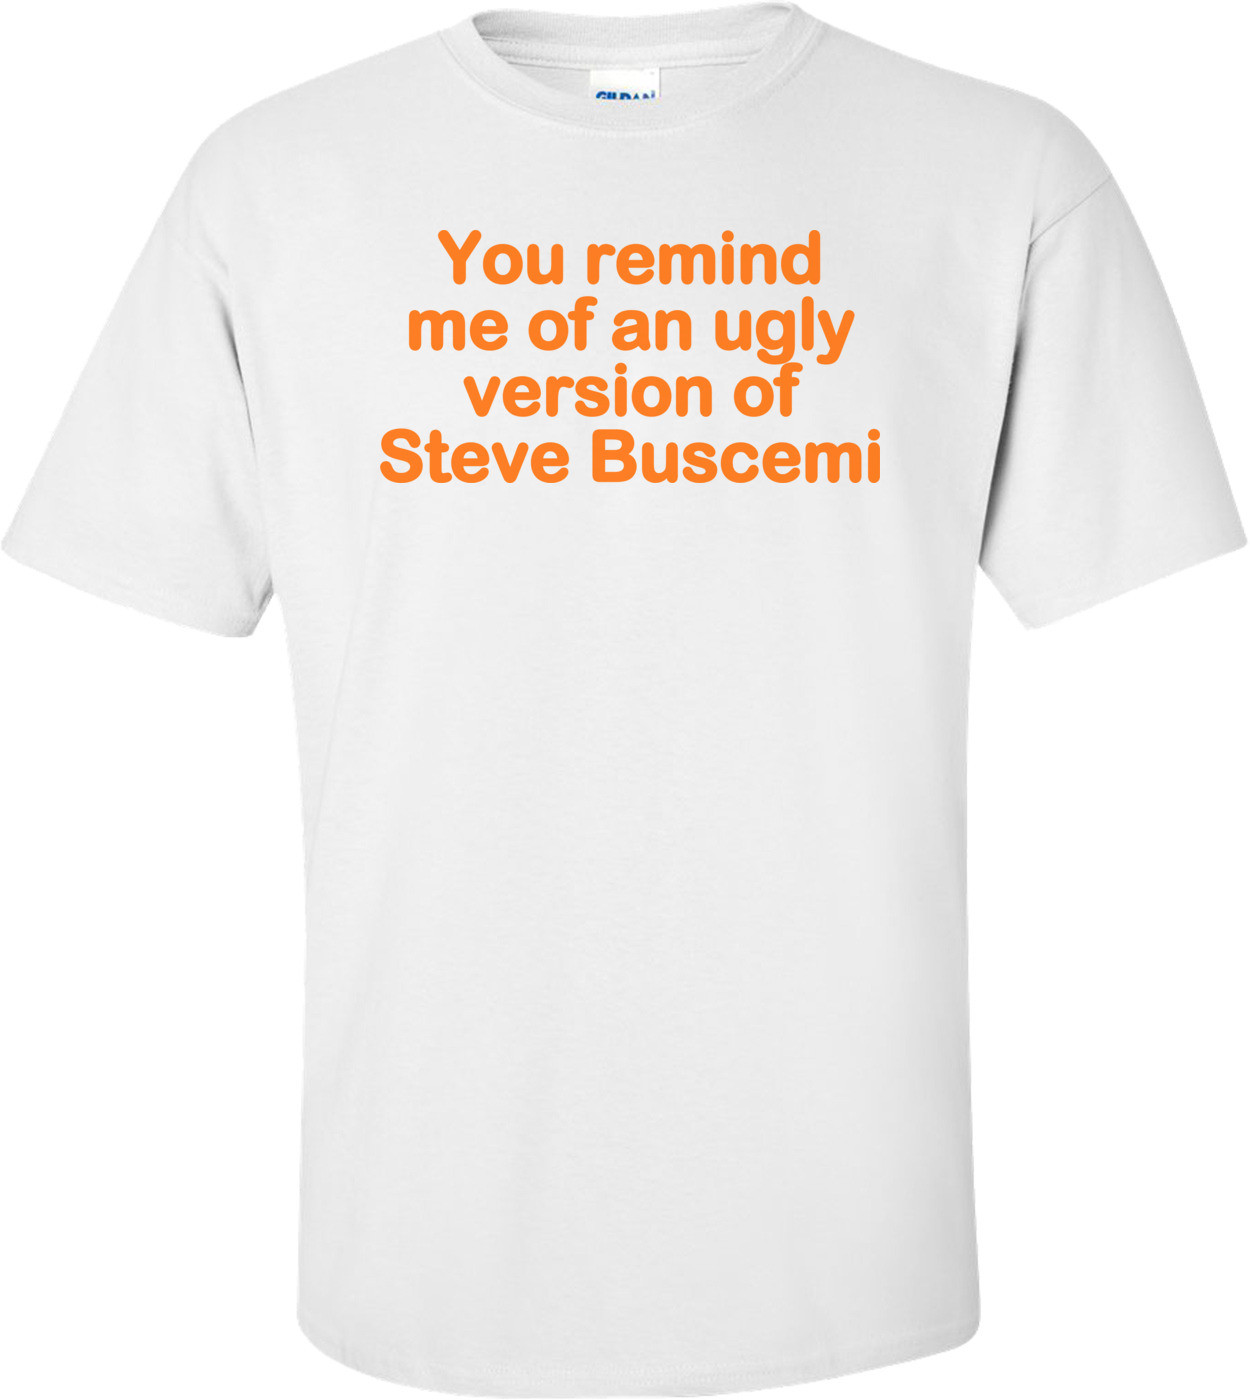 You Remind Me Of An Ugly Version Of Steve Buscemi! - Funny